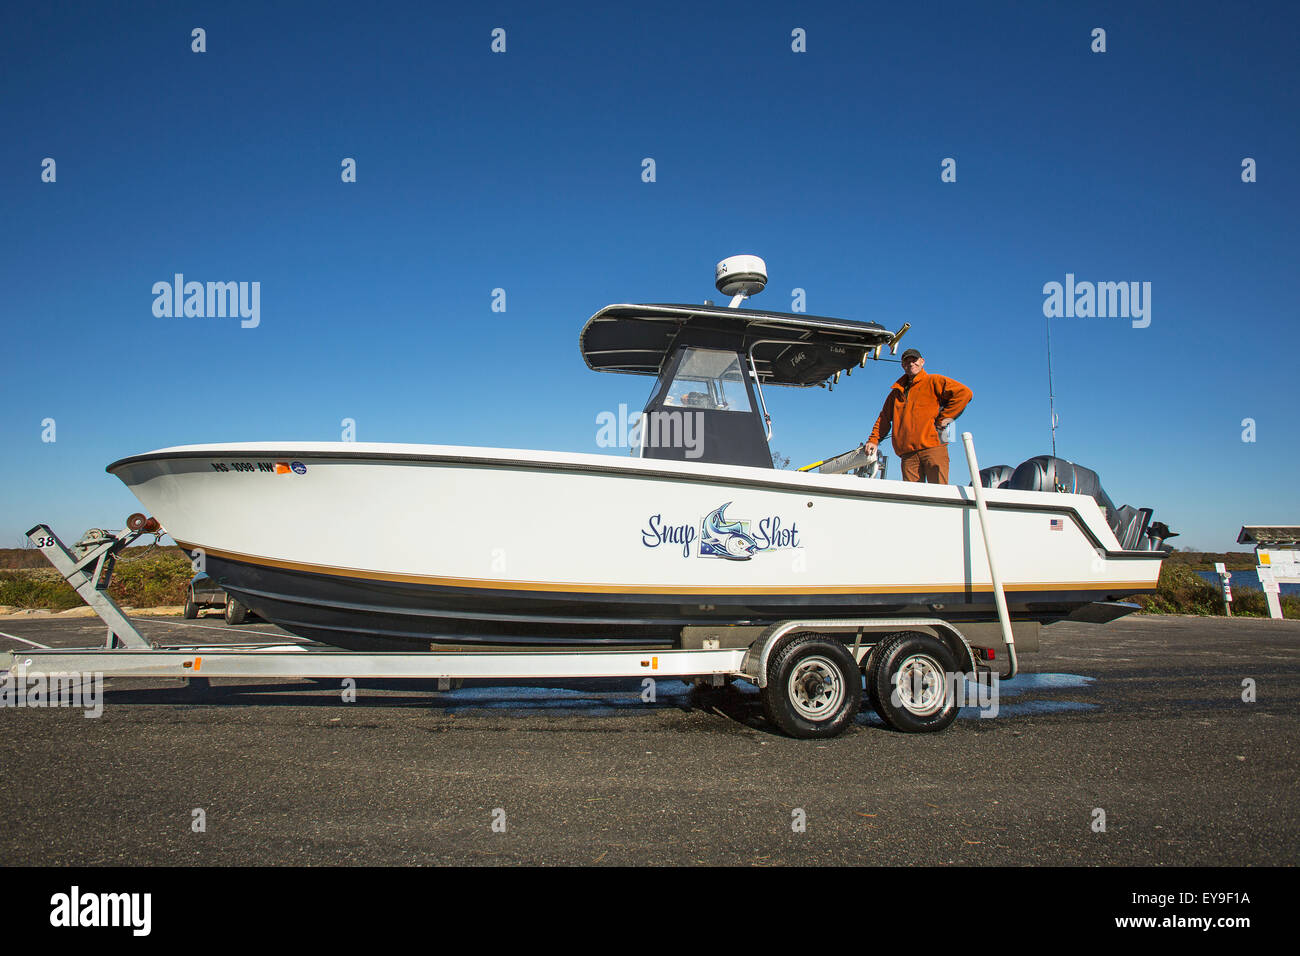 Man standing in his boat on a trailer; Montauk, New York, United States of America Stock Photo